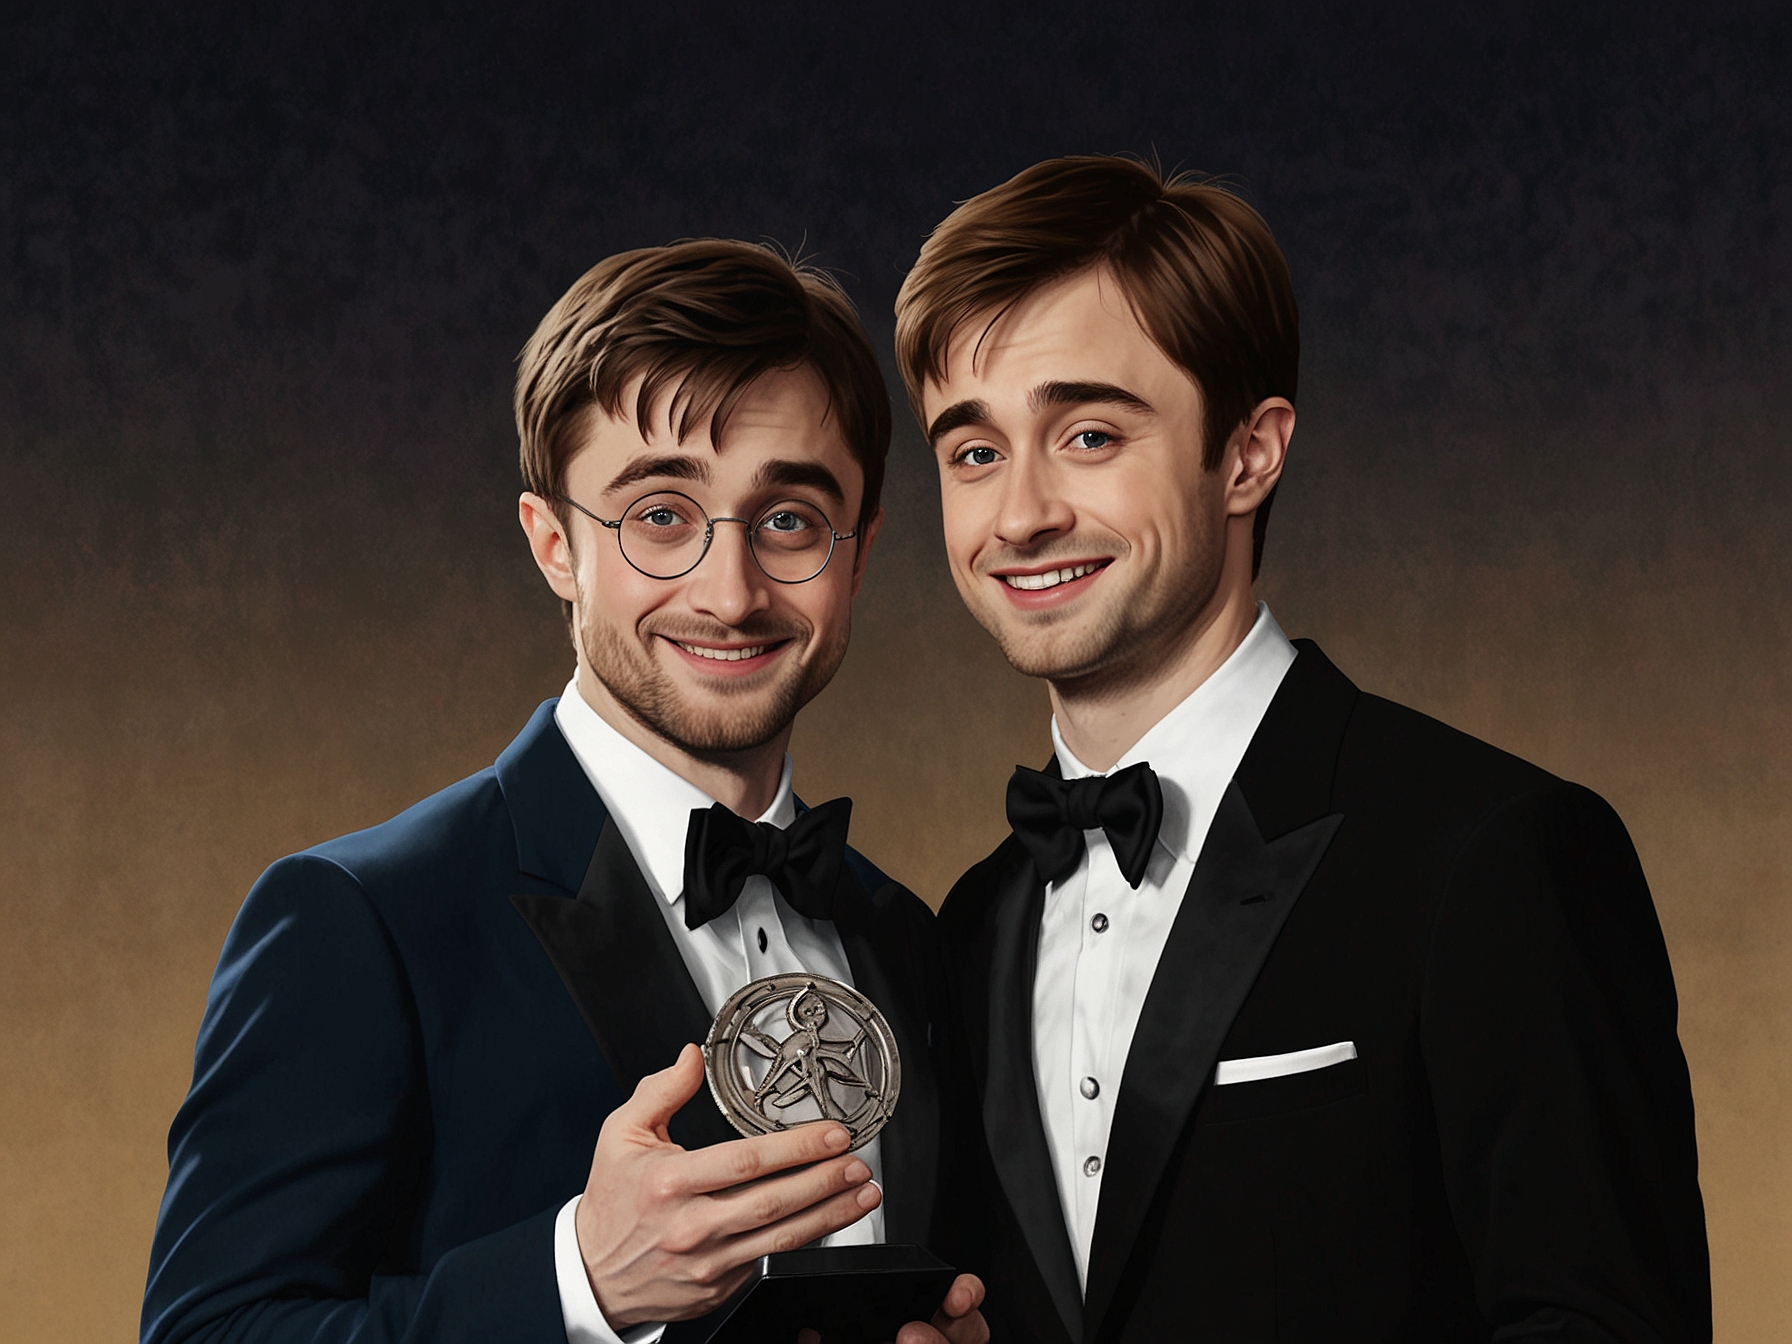 Daniel Radcliffe and Jeremy Strong pose with their Tony Awards, their expressions reflecting pride and joy for their acclaimed performances in 'Stereophonic'.